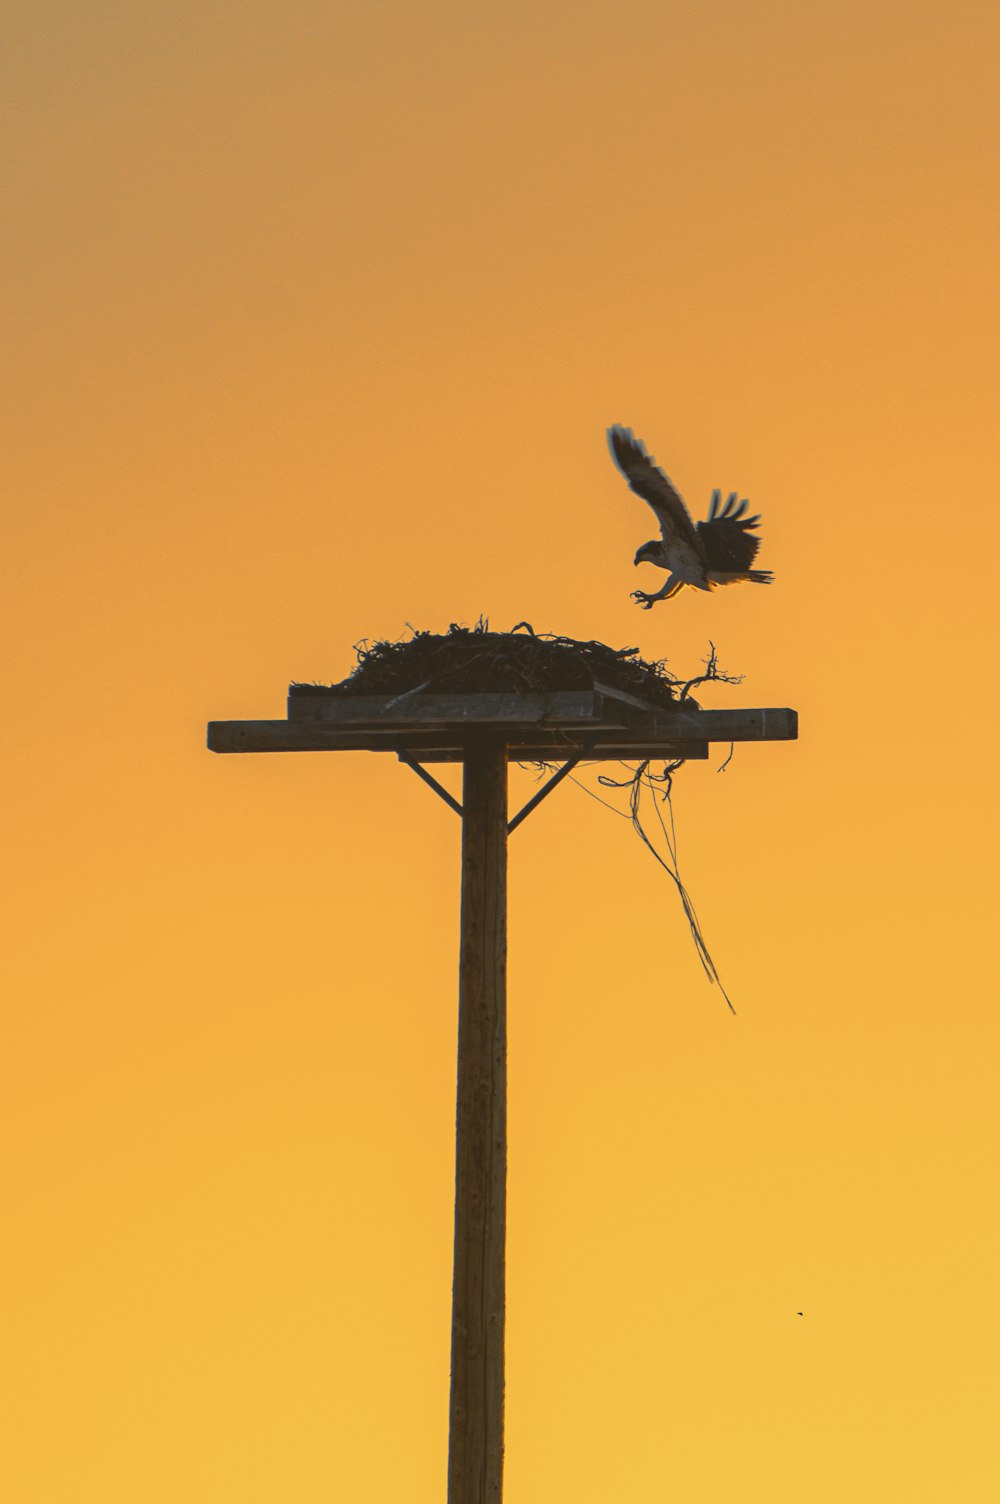 a bird flying over a nest on top of a wooden pole